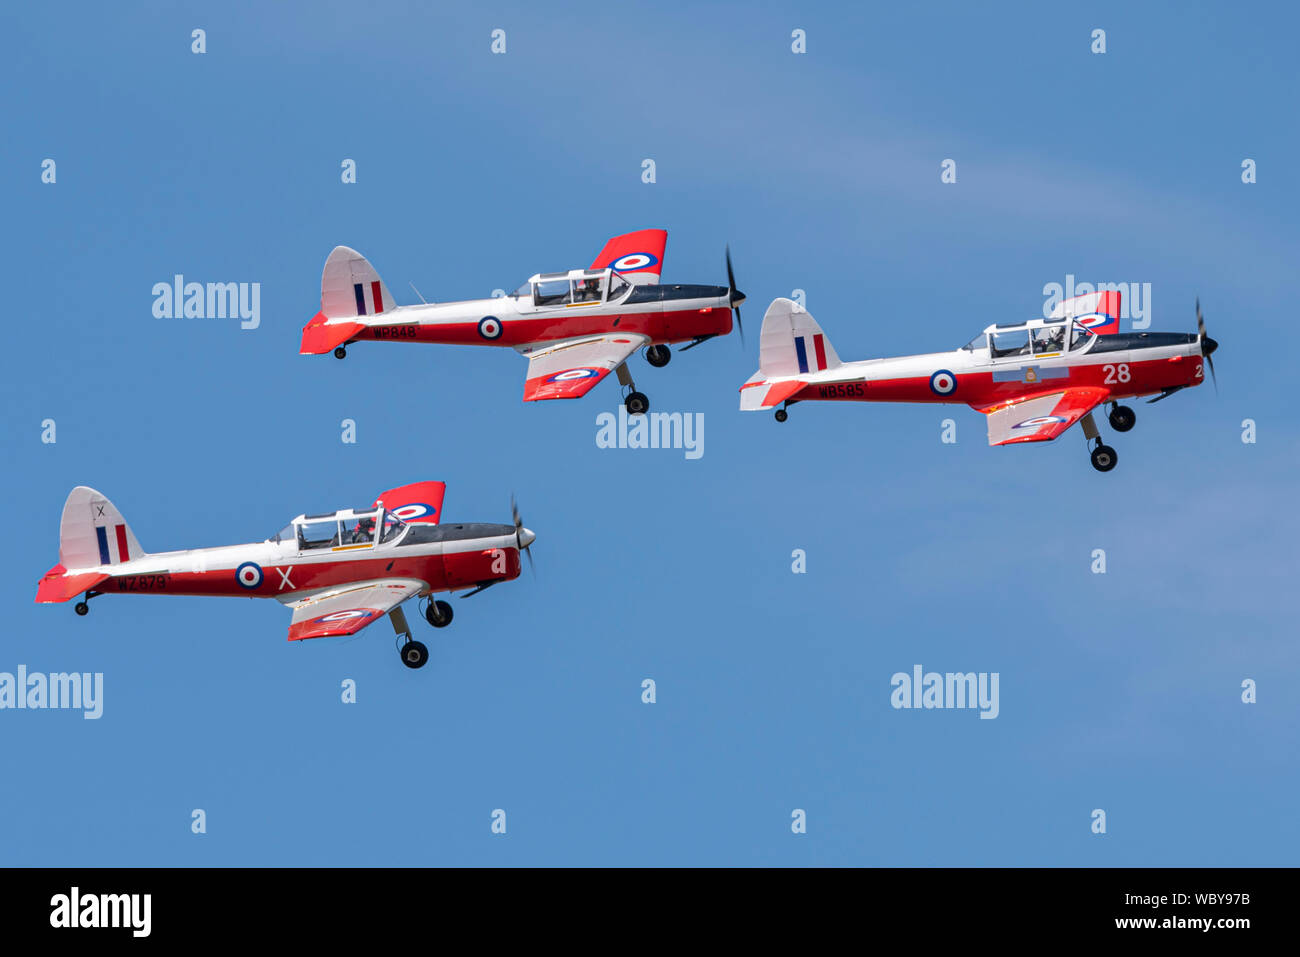 Red Sparrows display team of de Havilland DHC-1 Chipmunk training planes at the Children in Need Little Gransden Air & Car Show airshow, UK. Stock Photo